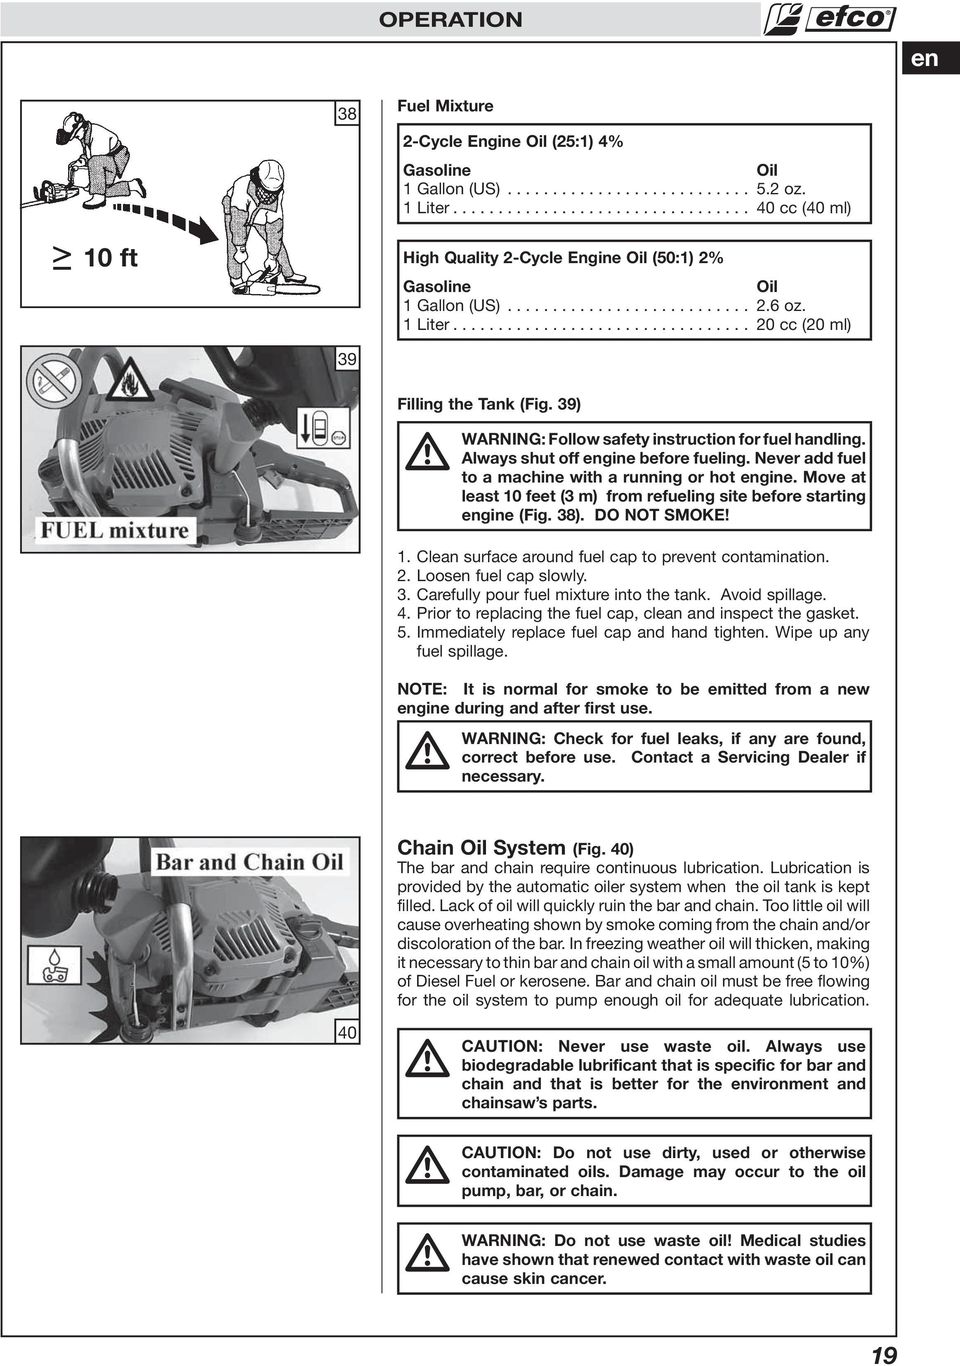 ................................ 20 cc (20 ml) 39 Filling the Tank (Fig. 39) WARNING: Follow safety instruction for fuel handling. Always shut off engine before fueling.